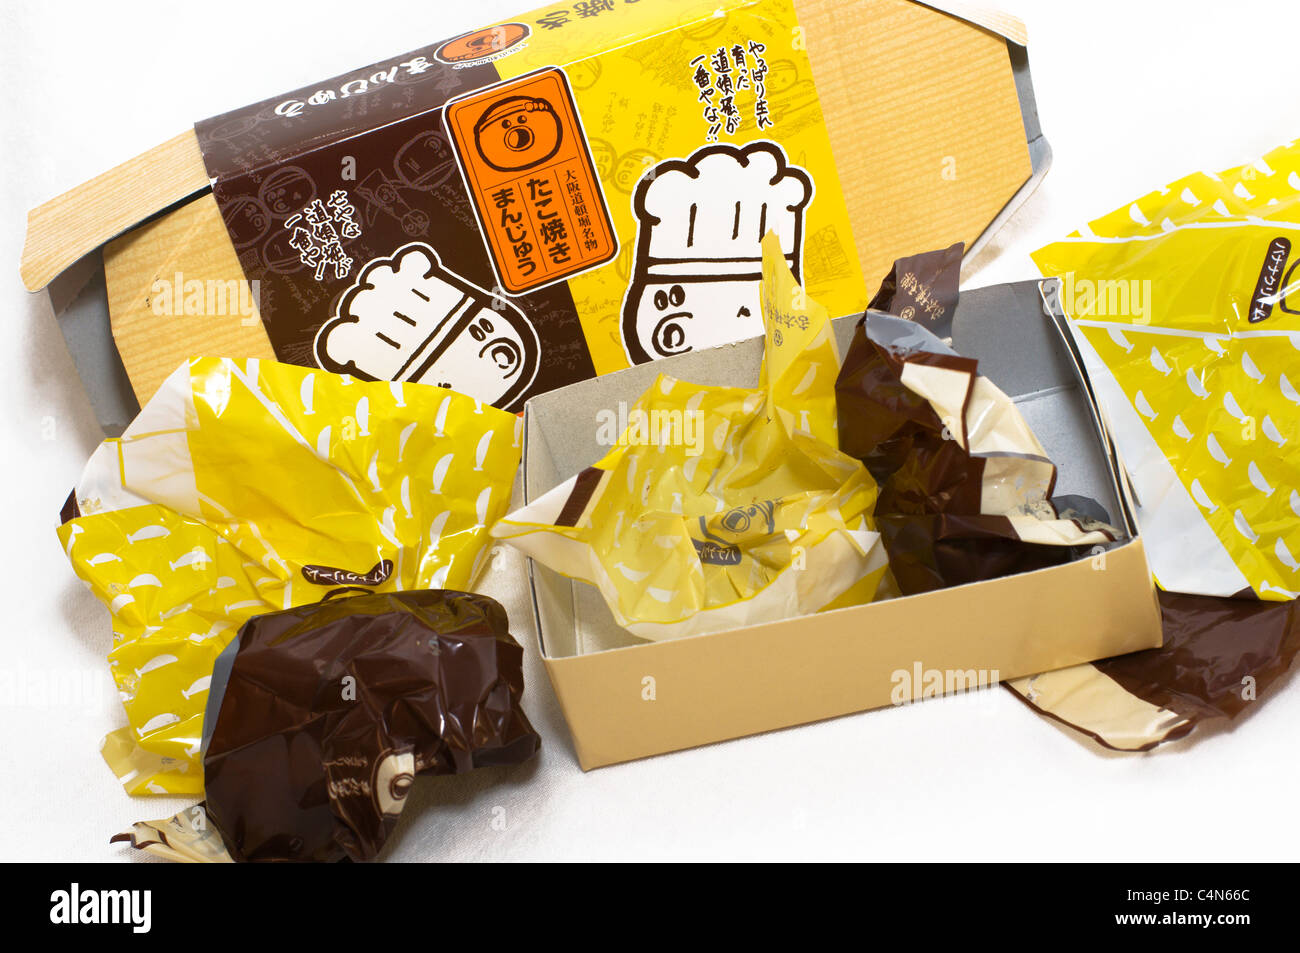 Empty wrappers and an open box are all that is left of this delicious Japanese dessert treat. Stock Photo